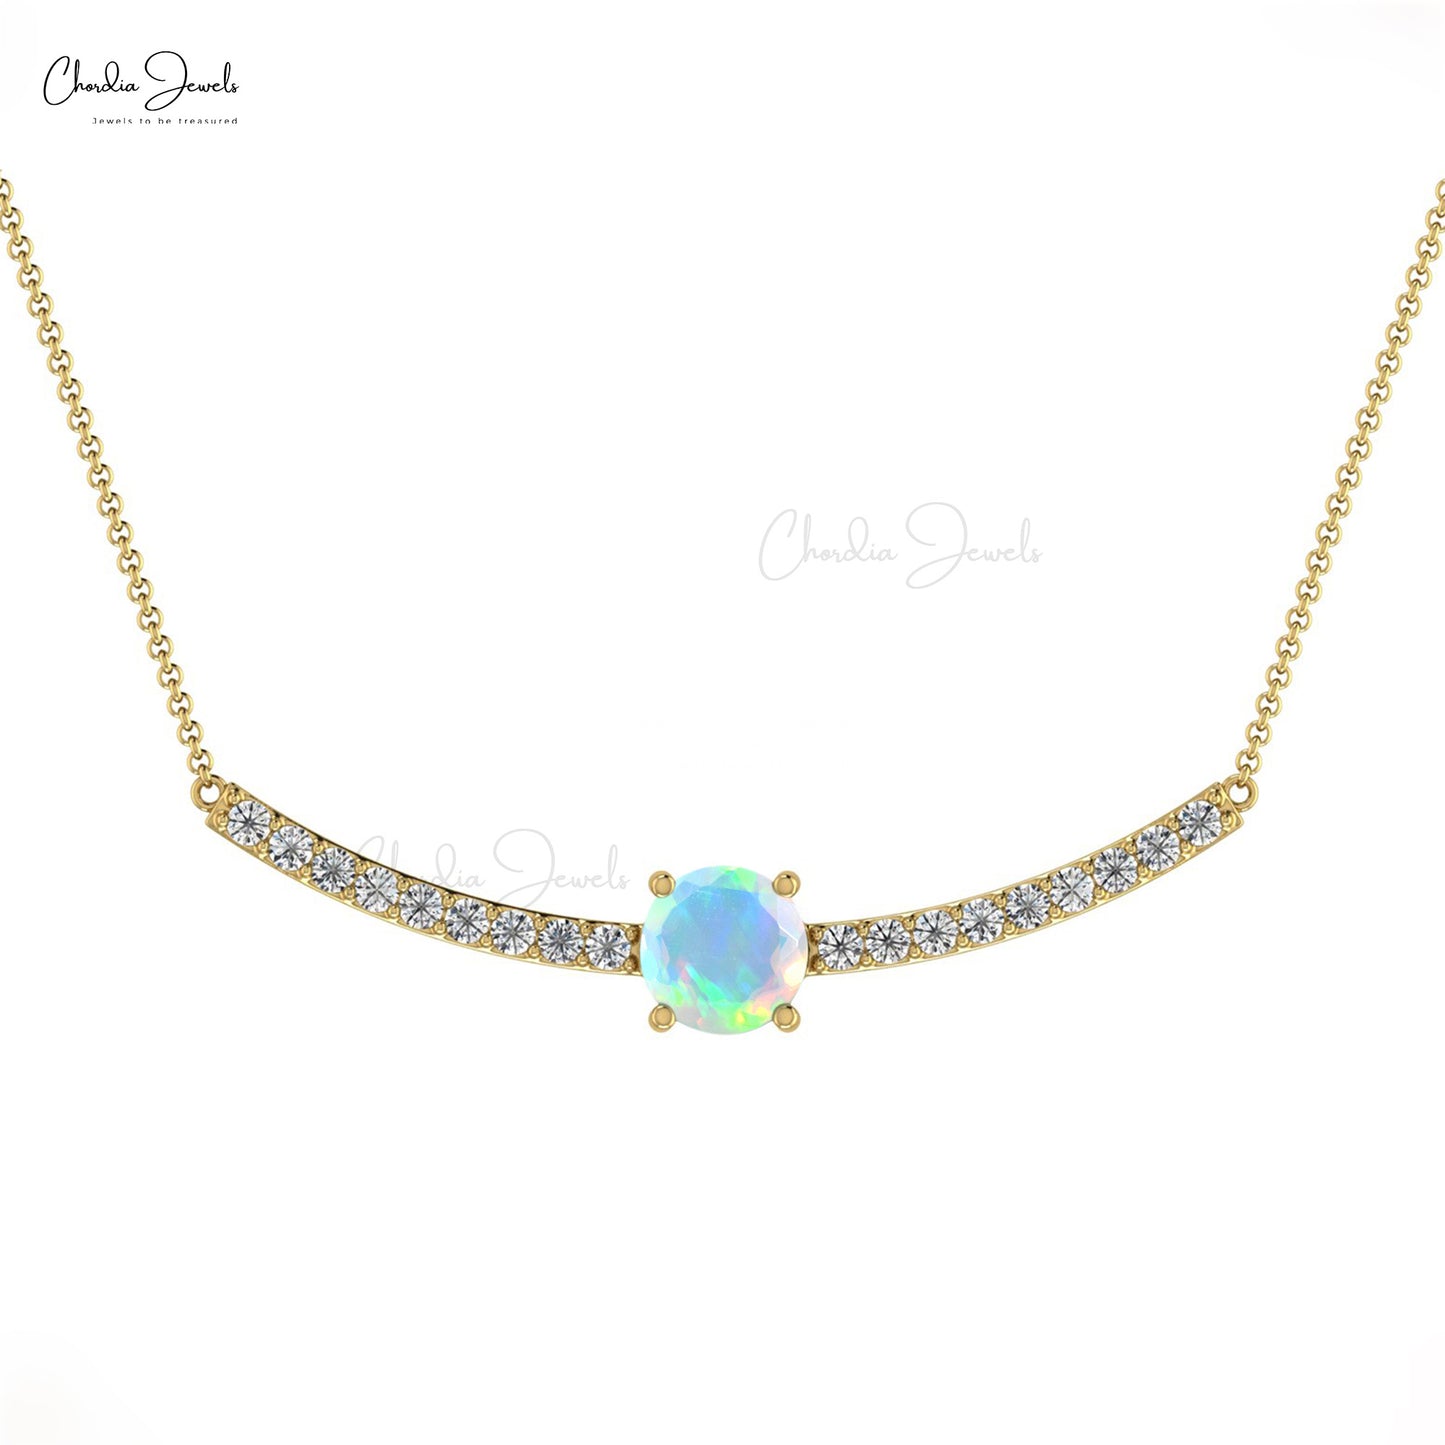 Natural Ethiopian Opal Necklace, 14k Solid Gold Diamond Necklace, 5mm Round Faceted Gemstone Necklace Gift for Anniversary